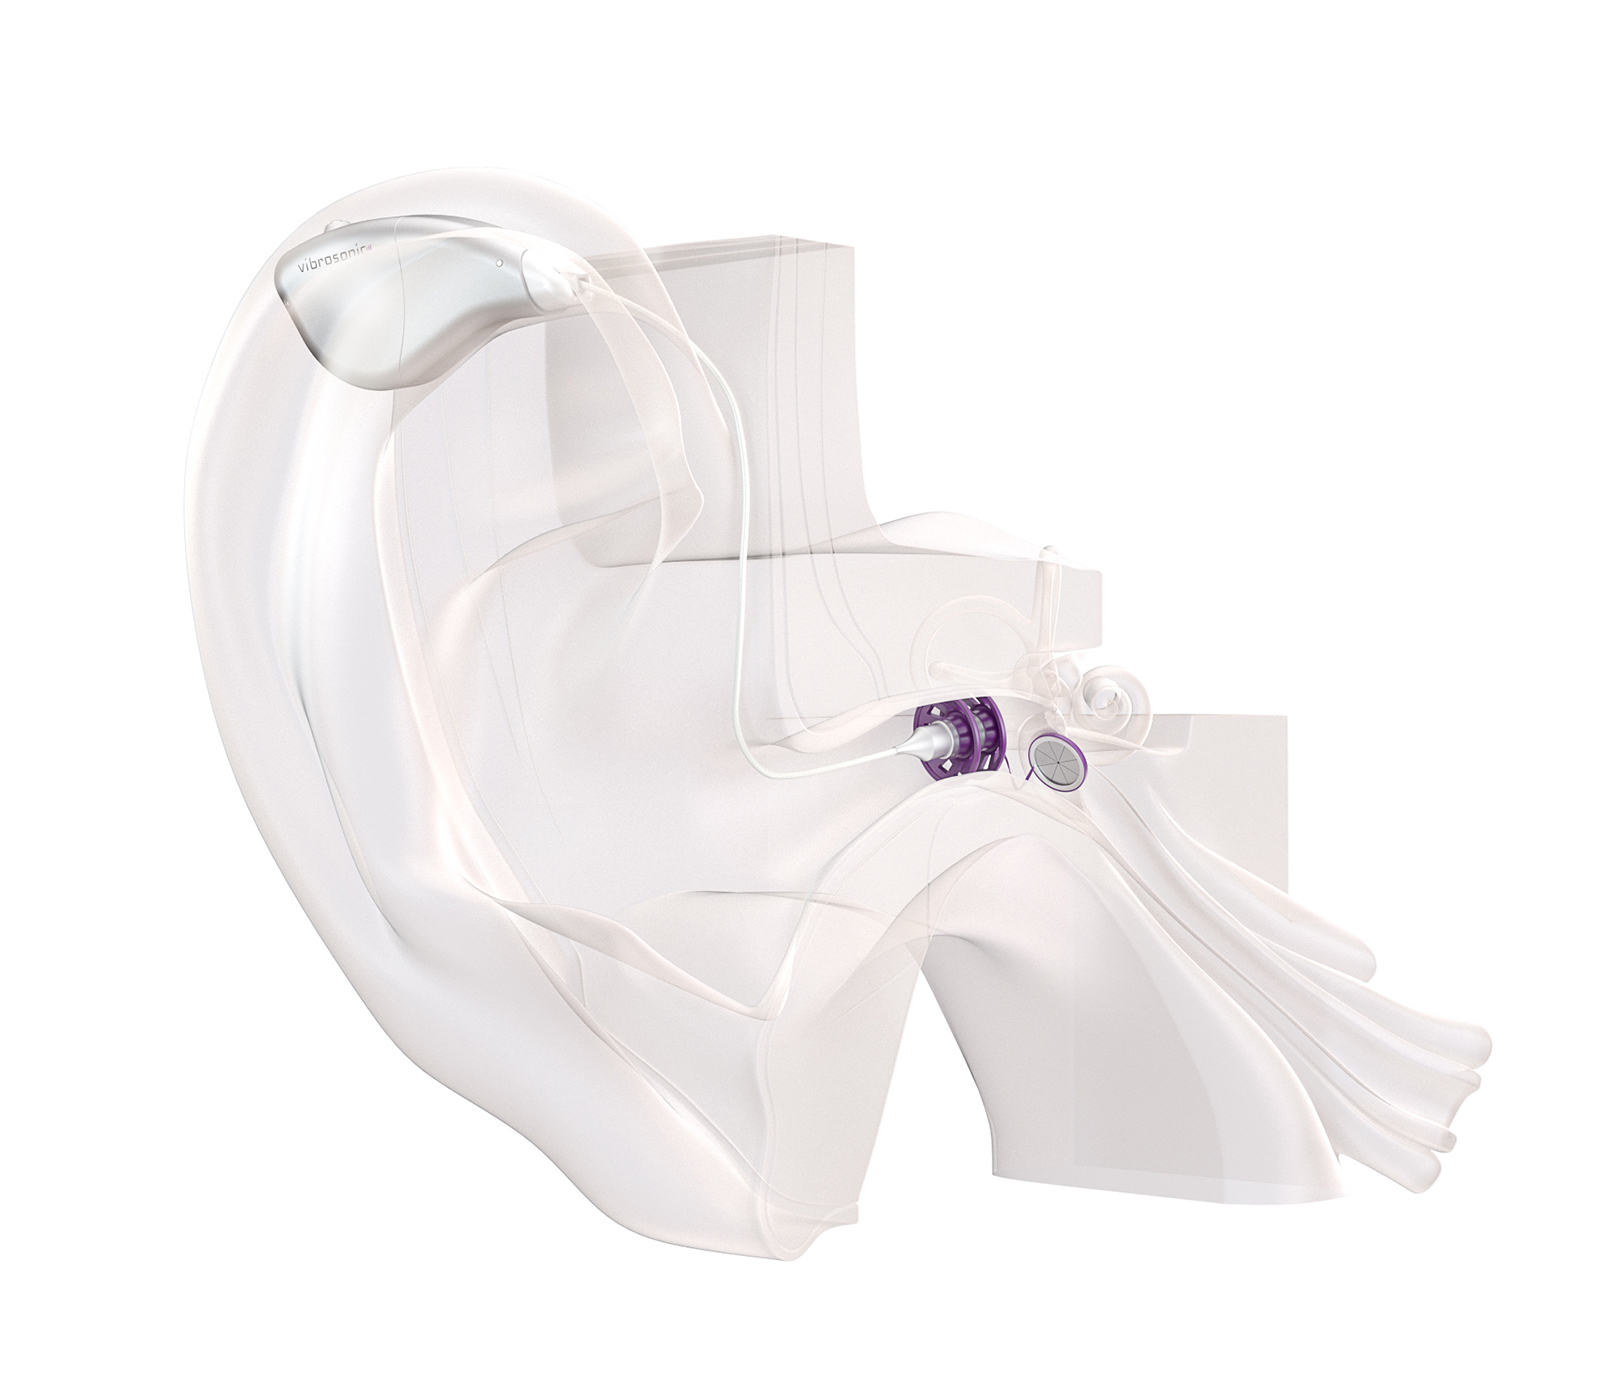 The hearing contact lens® and the auditory canal module are connected to a sound processor that is worn behind the ear